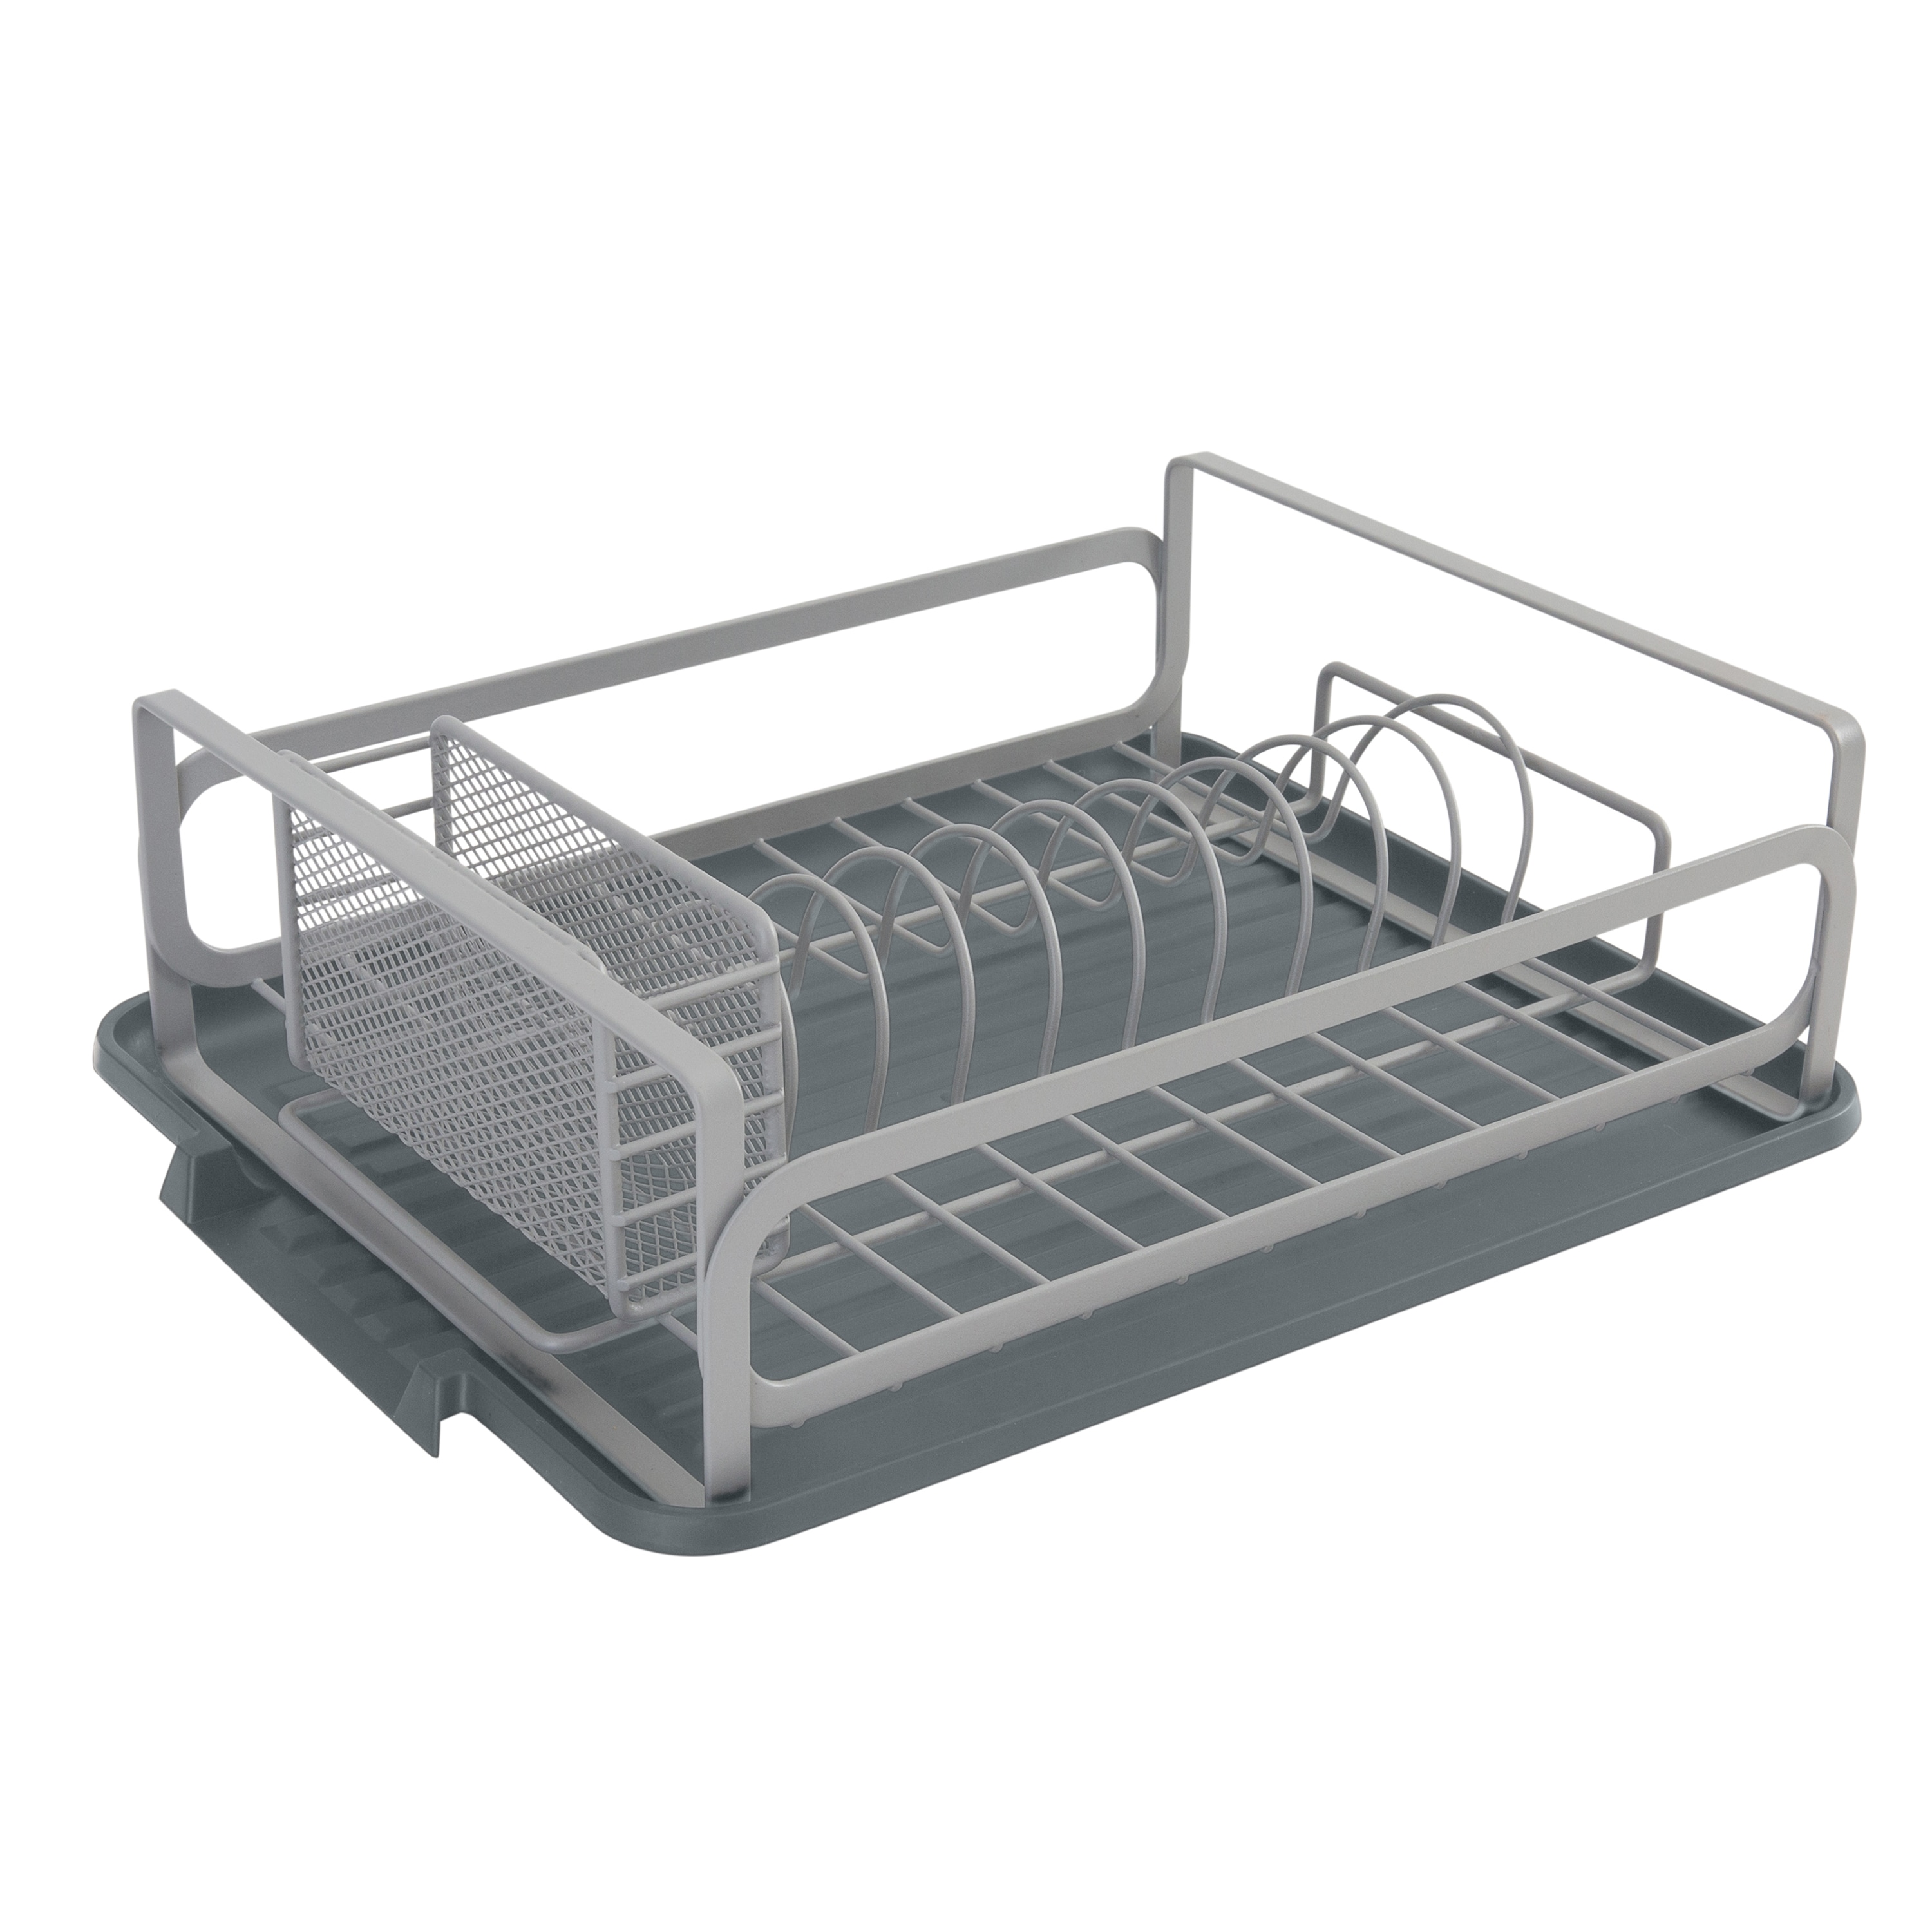 Dish Drying Rack Drainboard Set（12.8 - 20） Expandable Compact Gray,Large